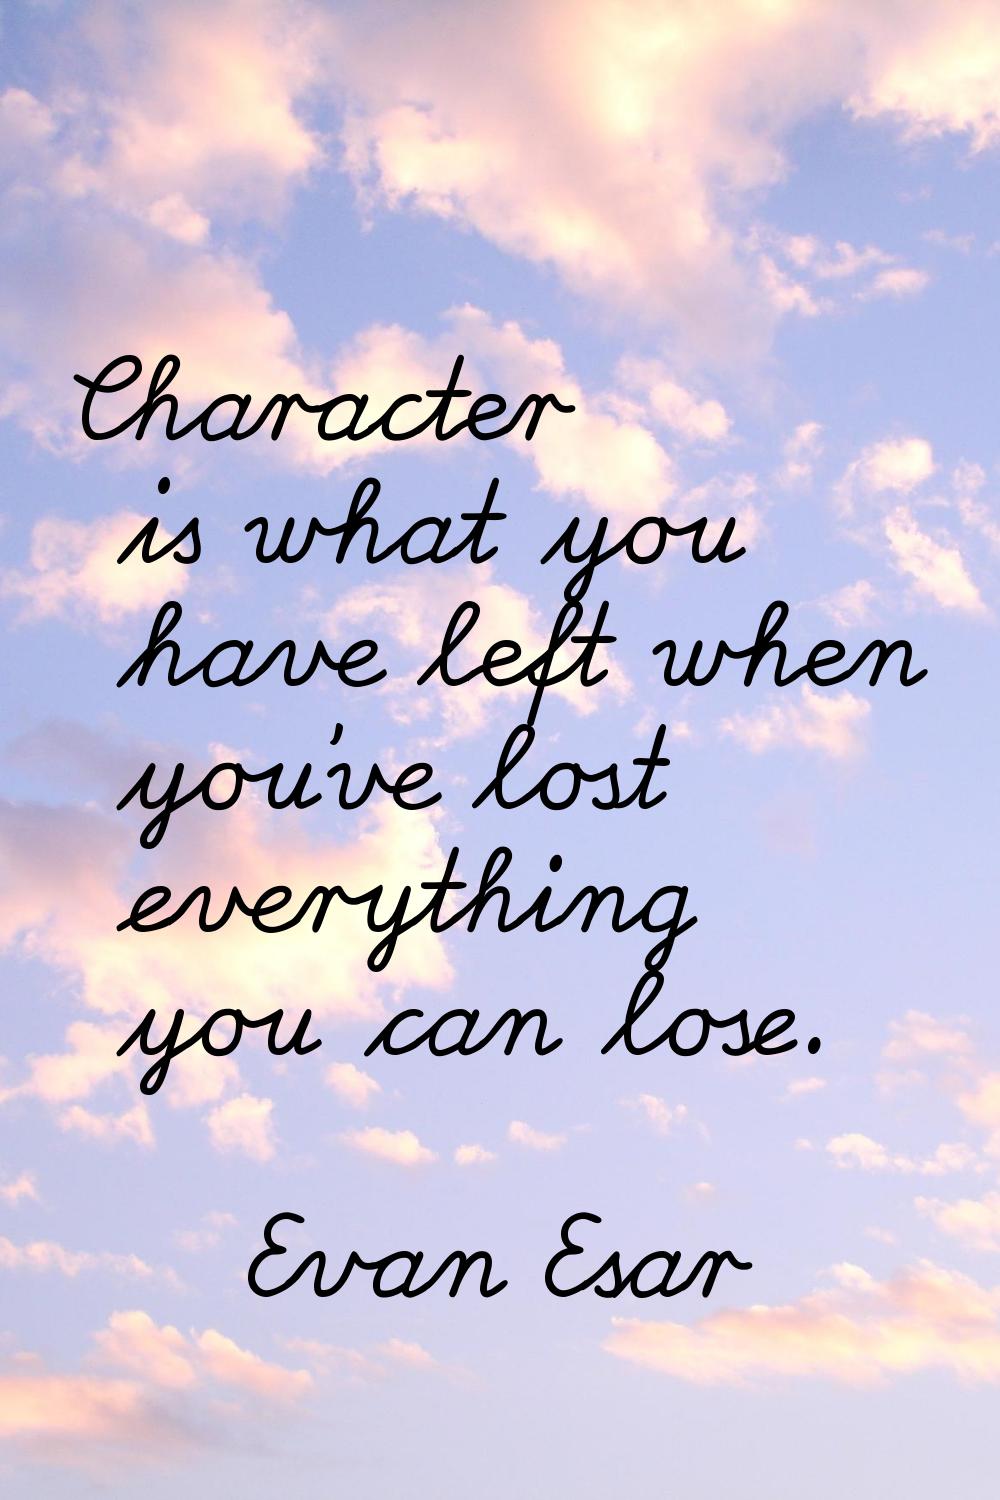 Character is what you have left when you've lost everything you can lose.